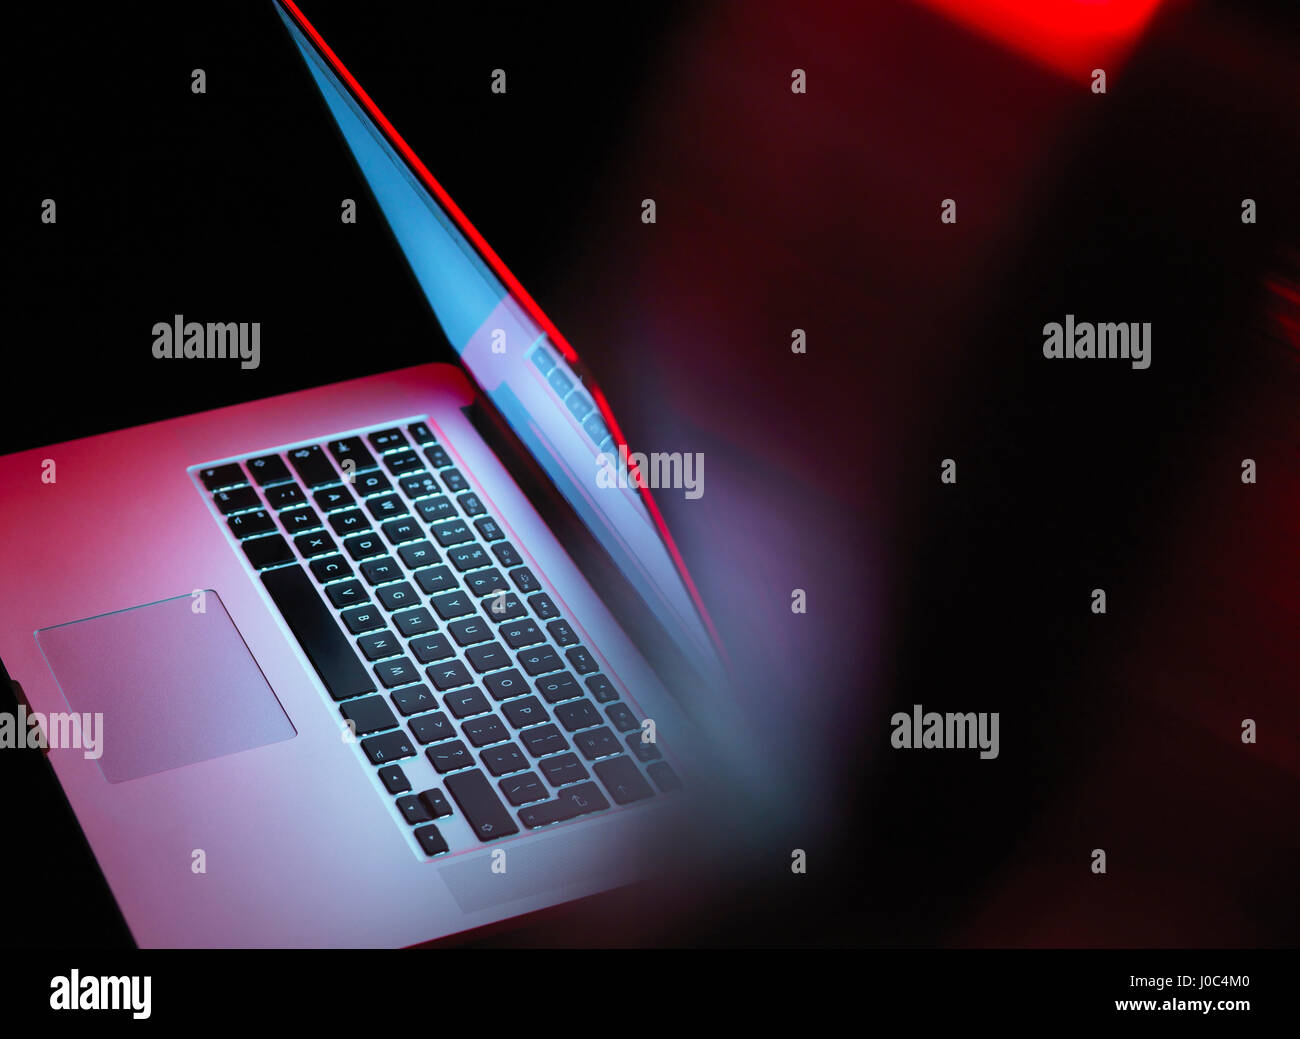 Cyber attack, laptop computer being infected by virus Stock Photo